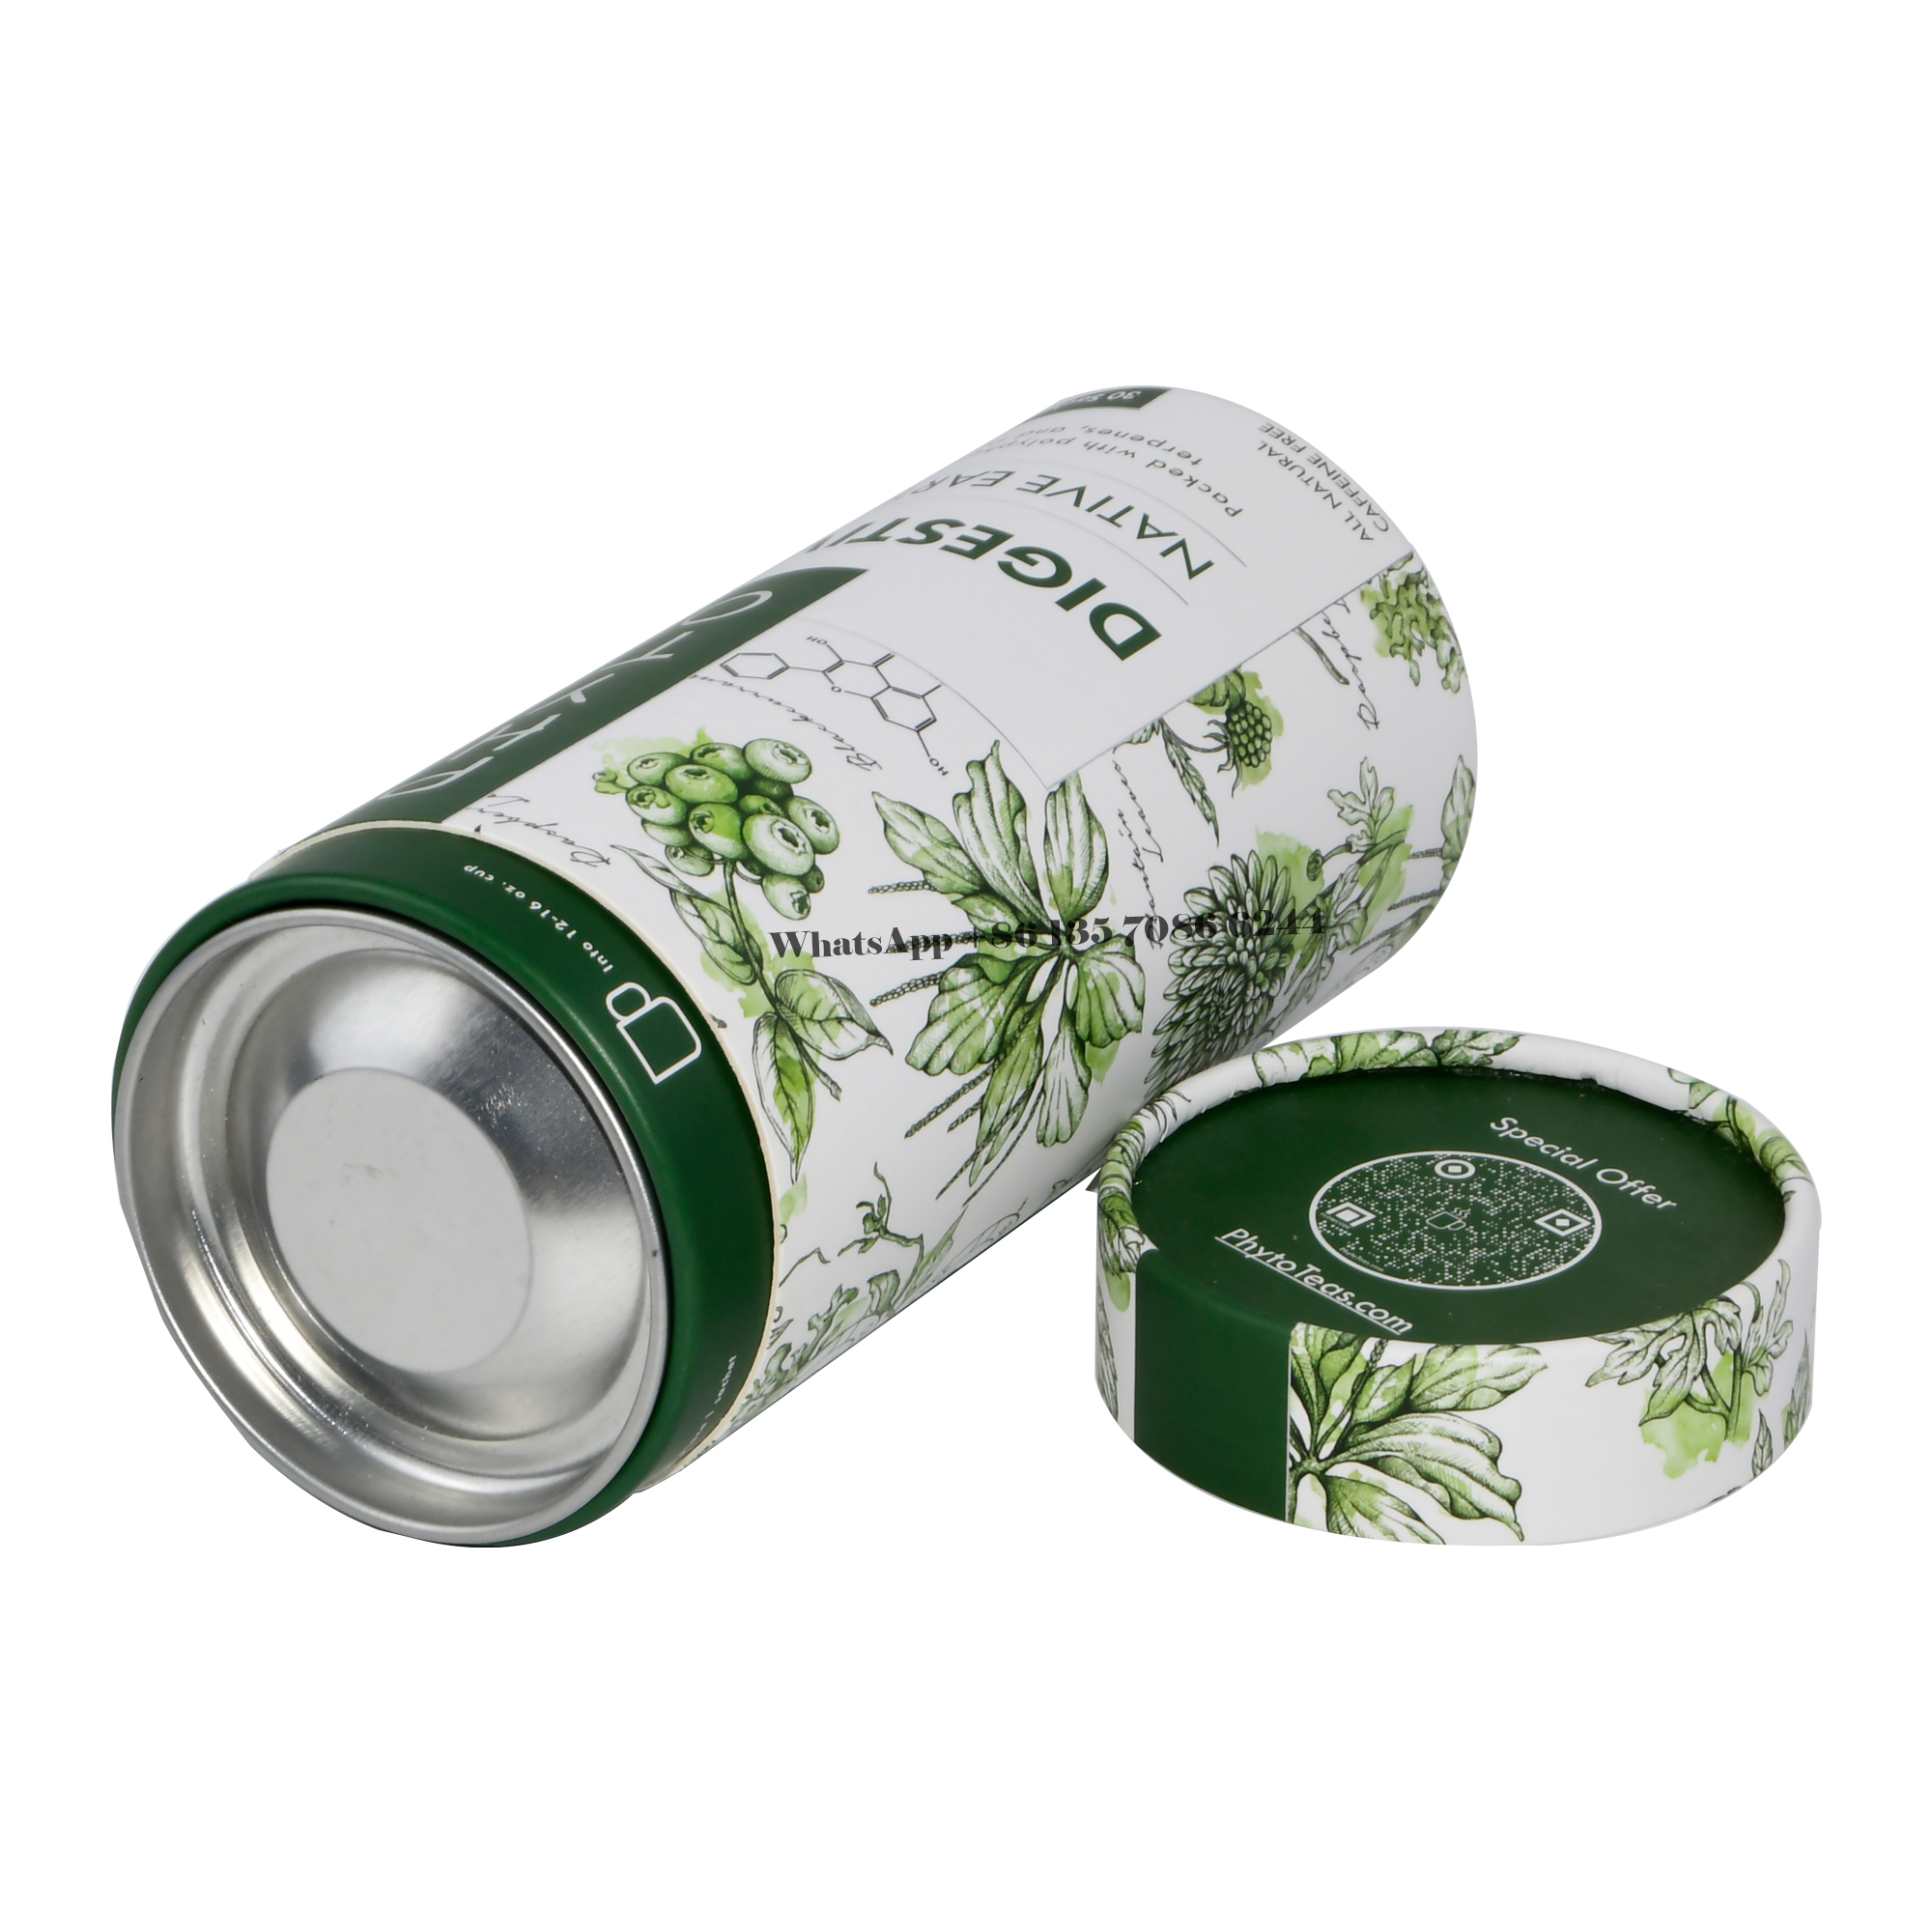  Exquisite Stylish Blend Tea Paper Tube Packaging Round Box  